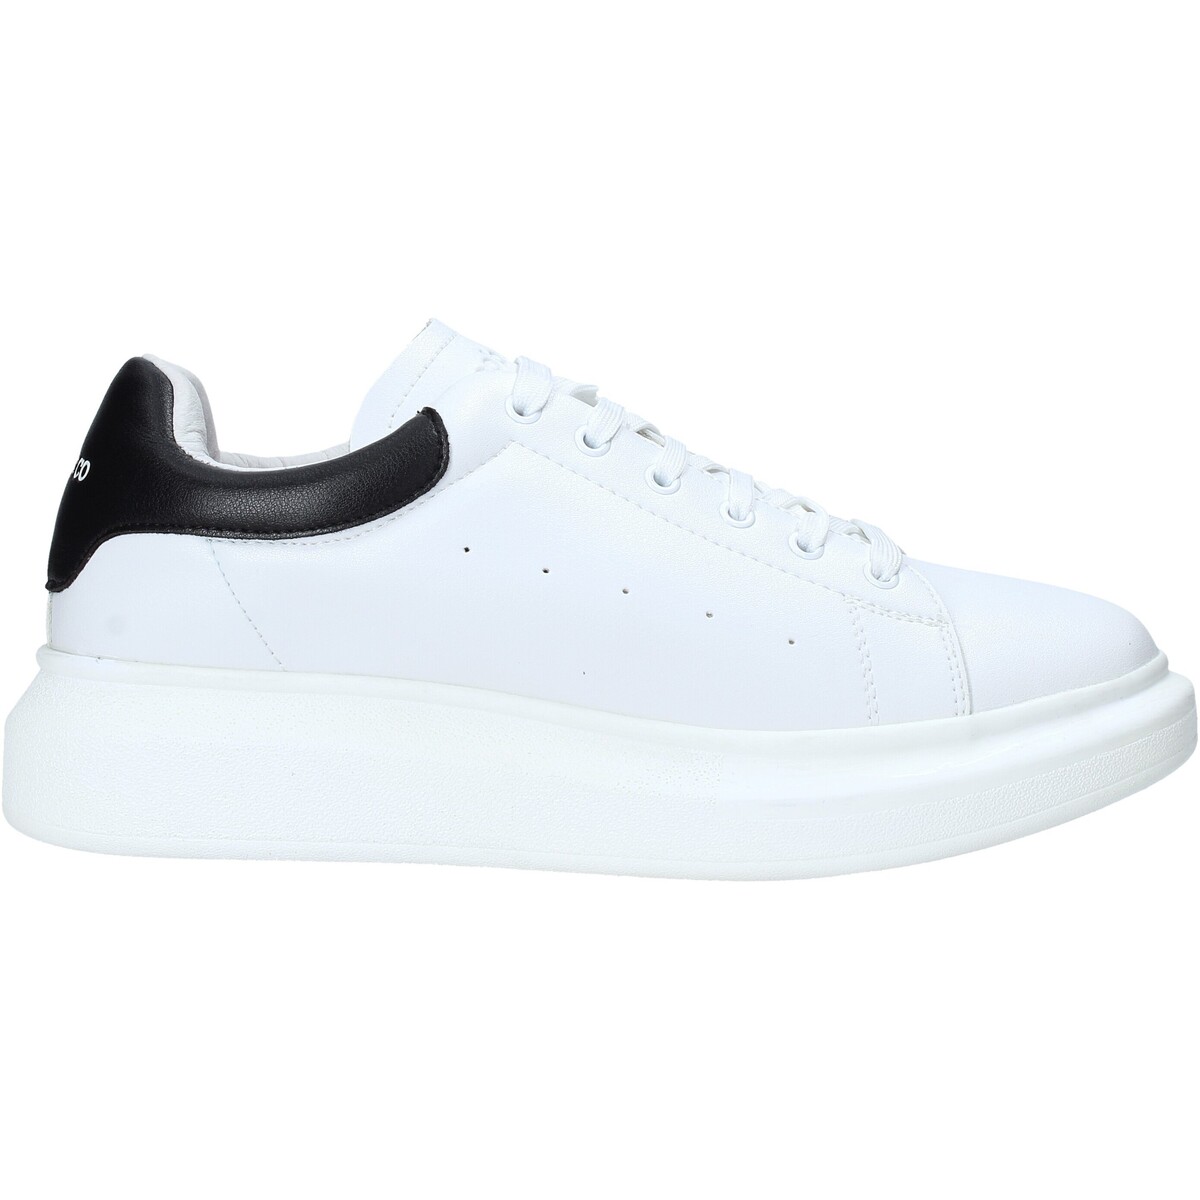 Xαμηλά Sneakers Rocco Barocco RBR-47.1